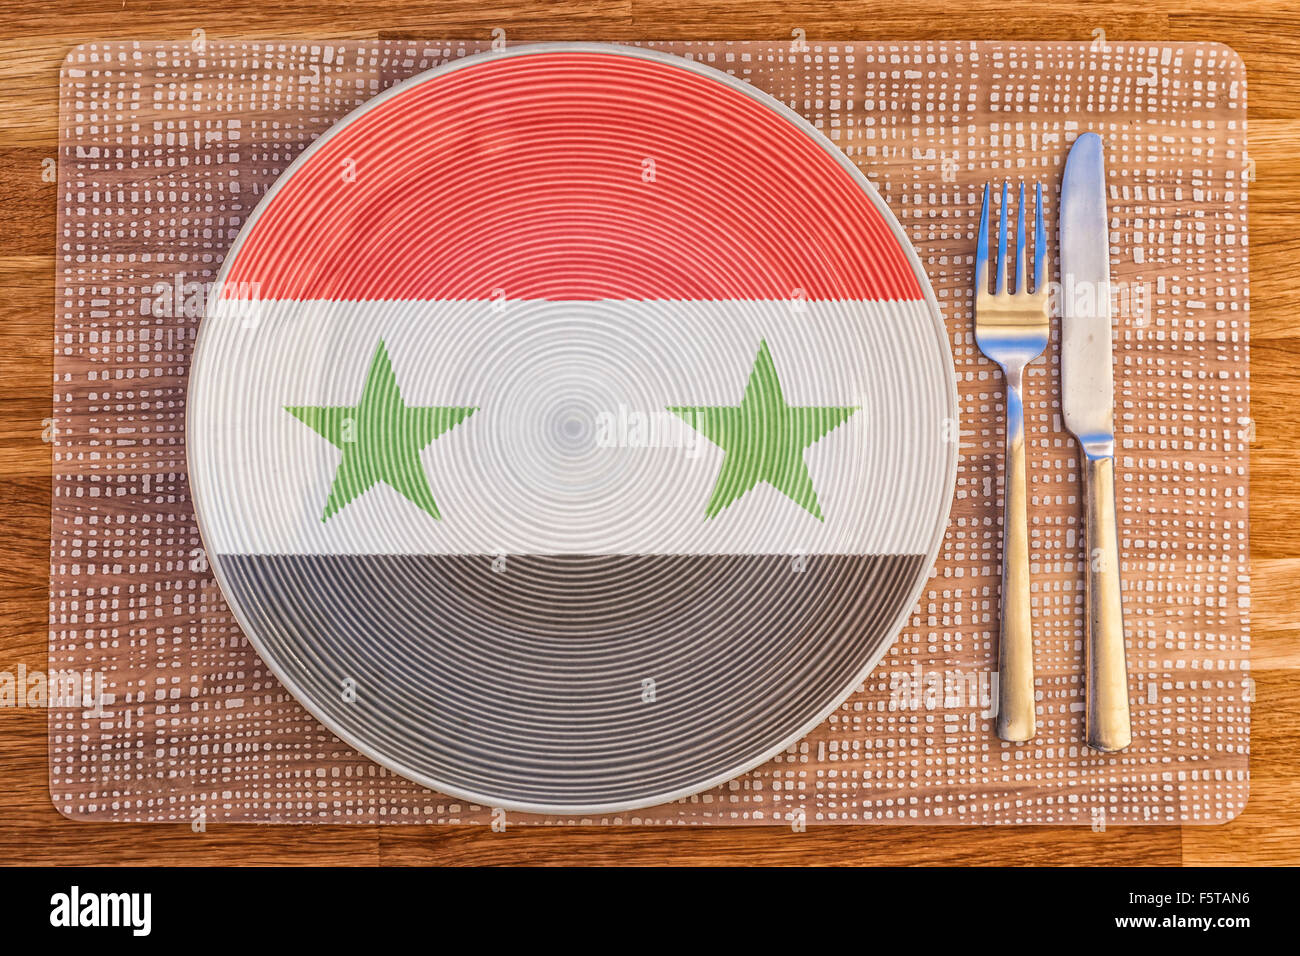 Dinner plate with the flag of Syria on it for your international food and drink concepts. Stock Photo